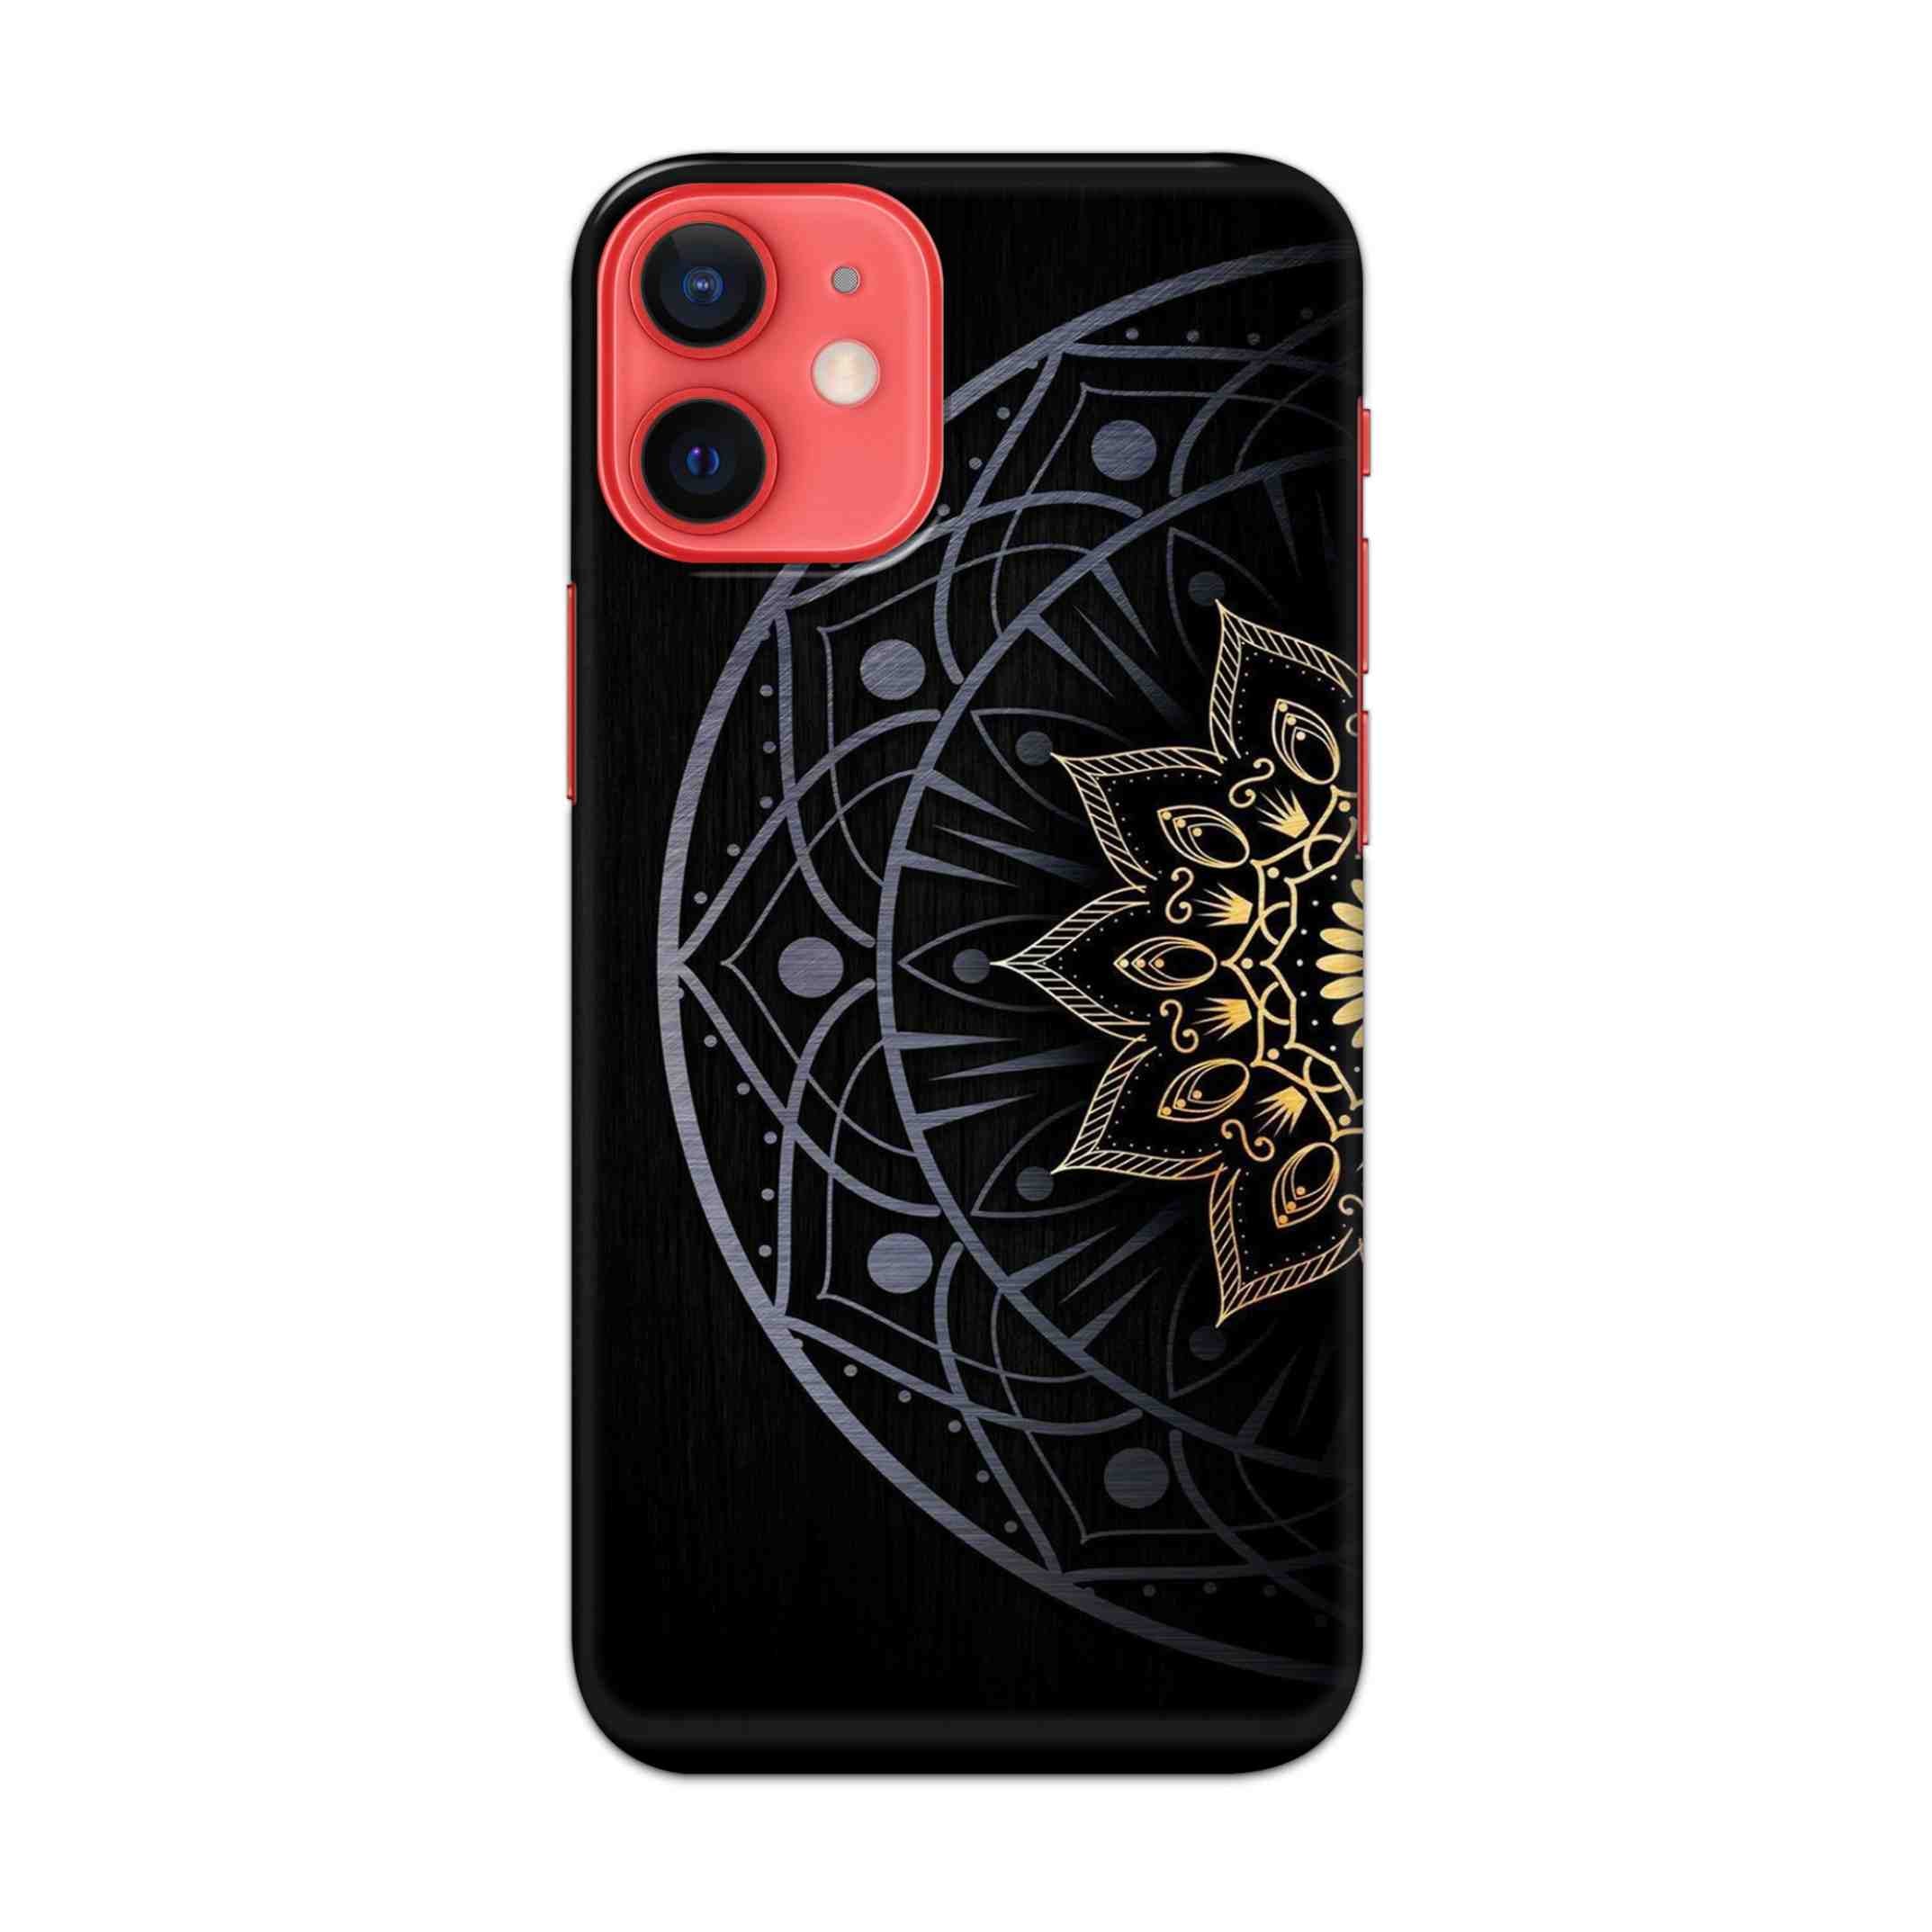 Buy Psychedelic Mandalas Hard Back Mobile Phone Case/Cover For Apple iPhone 12 mini Online